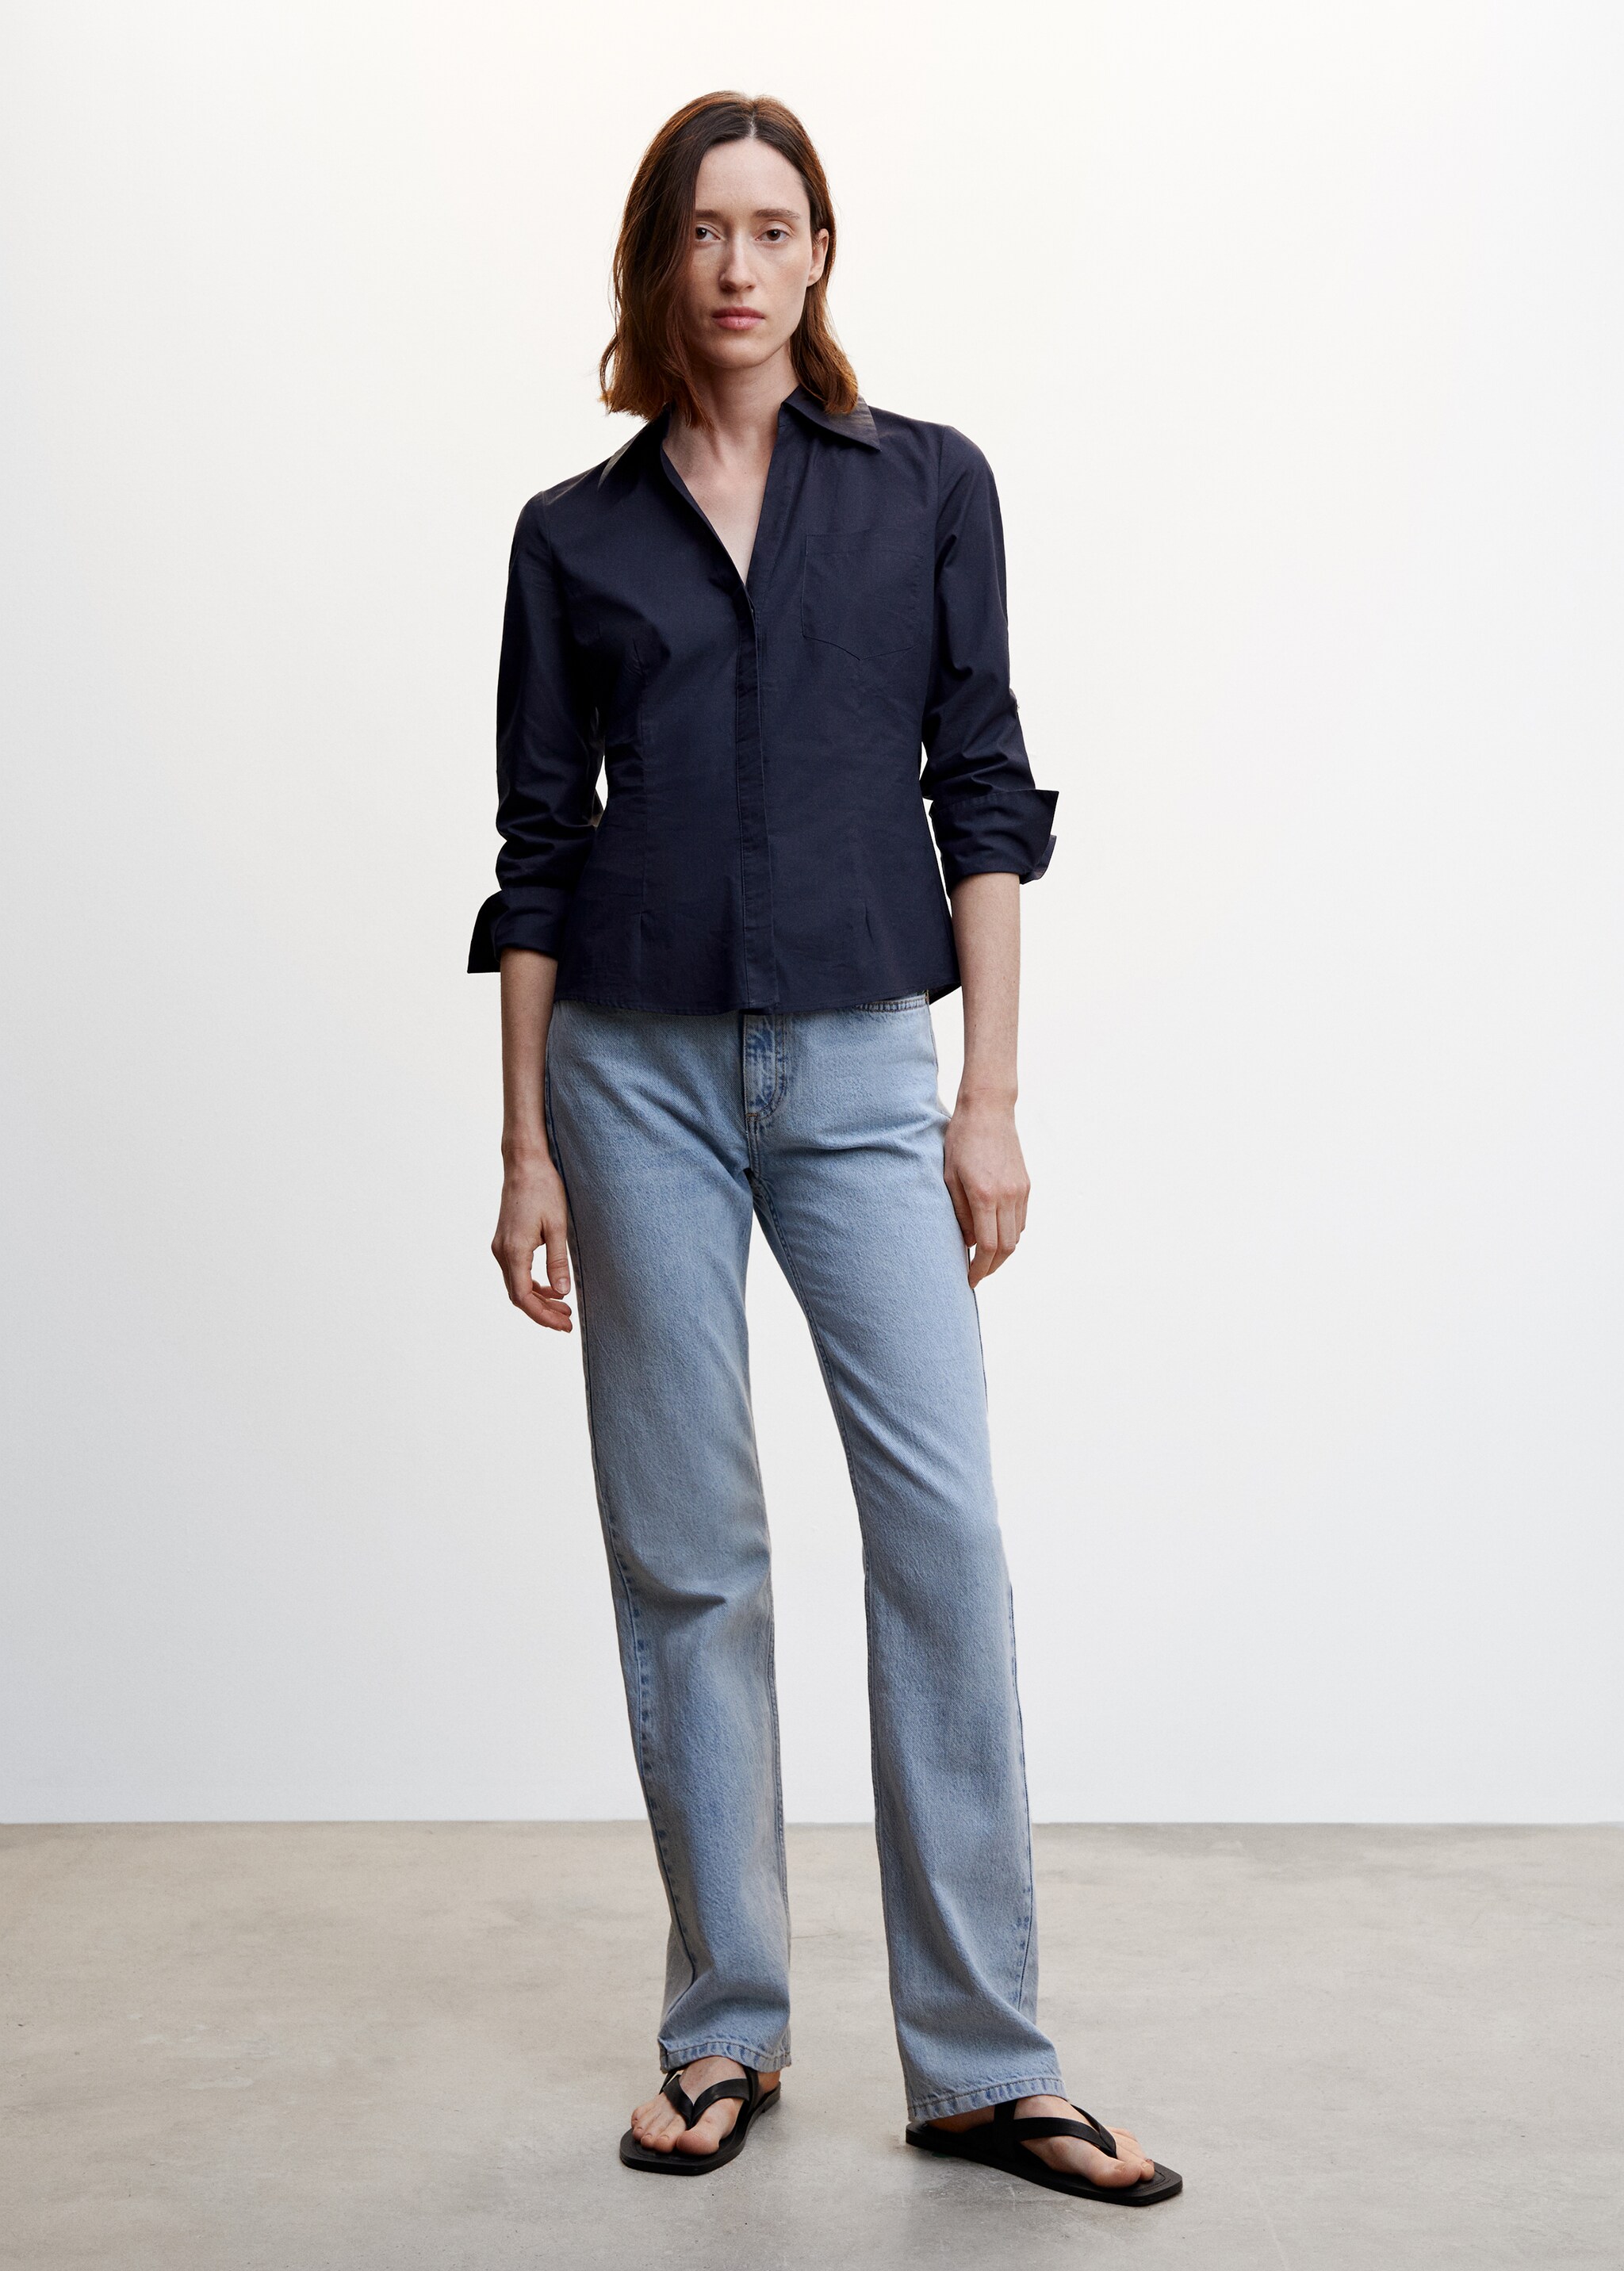 Pleated cotton shirt - General plane